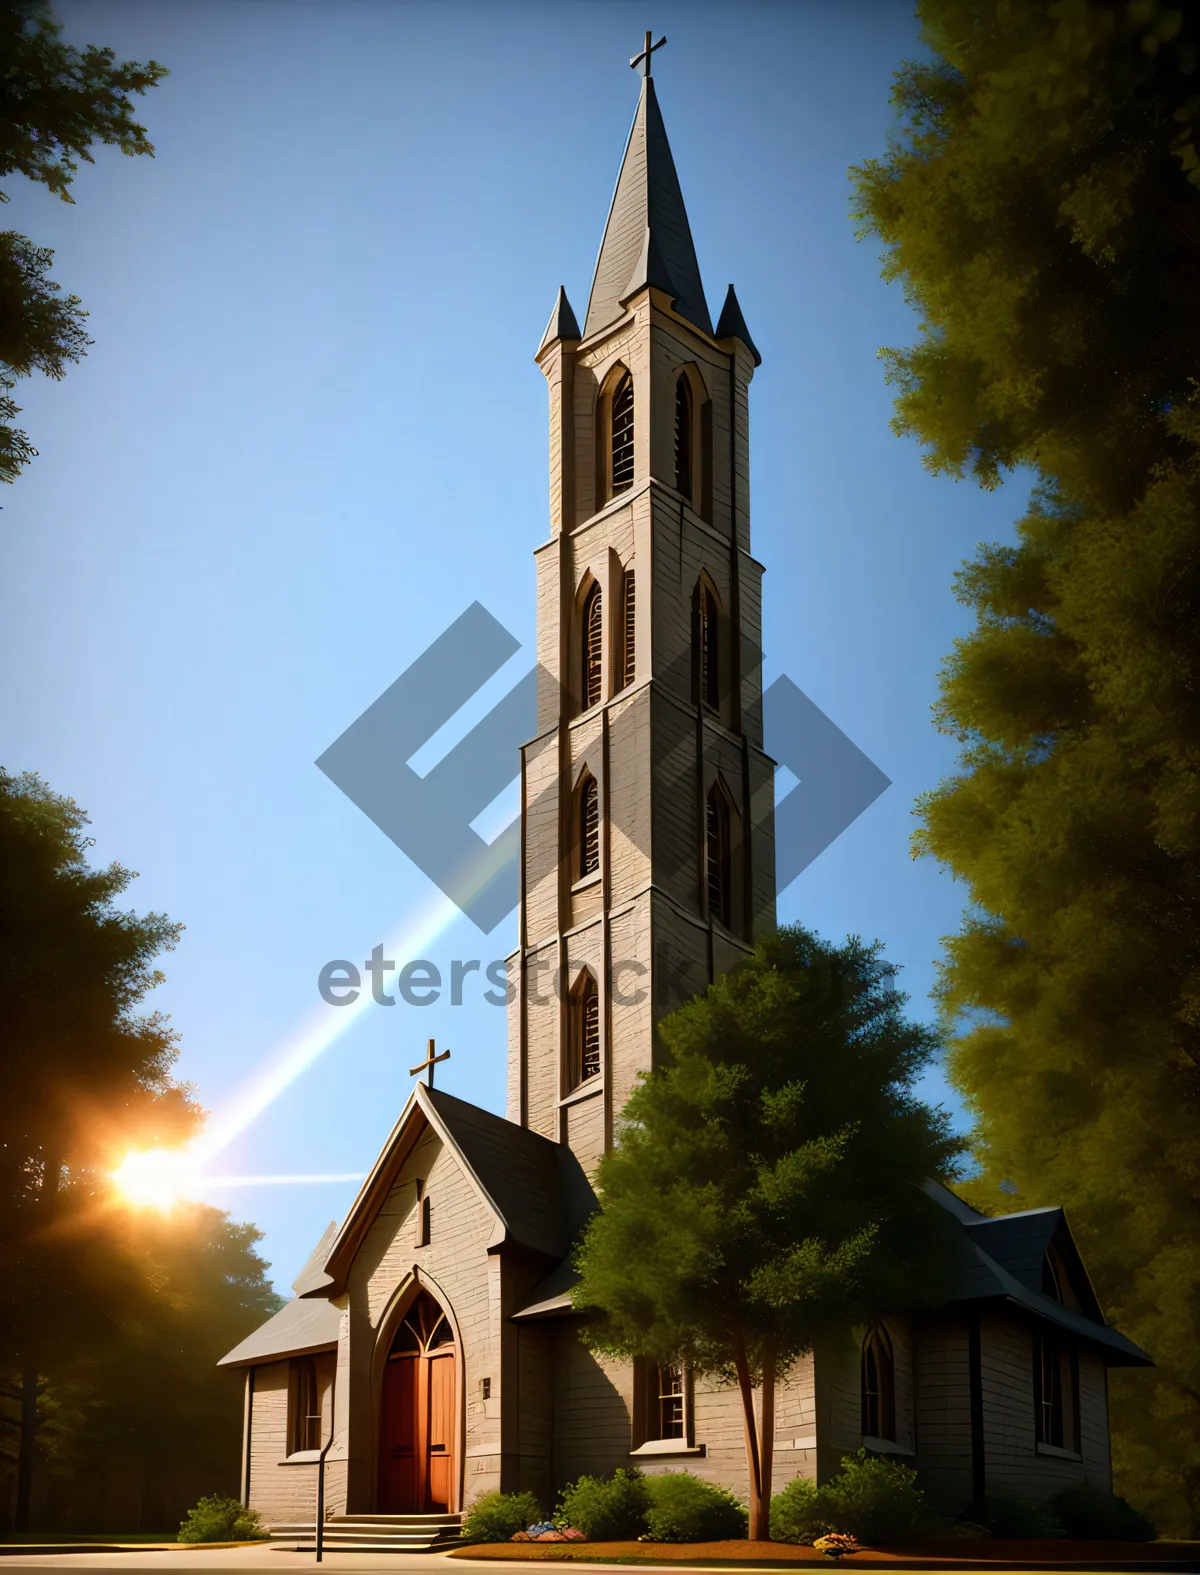 Picture of The aged bell tower of a cathedral standing in a historic city, a timeless symbol of reverence and heritage